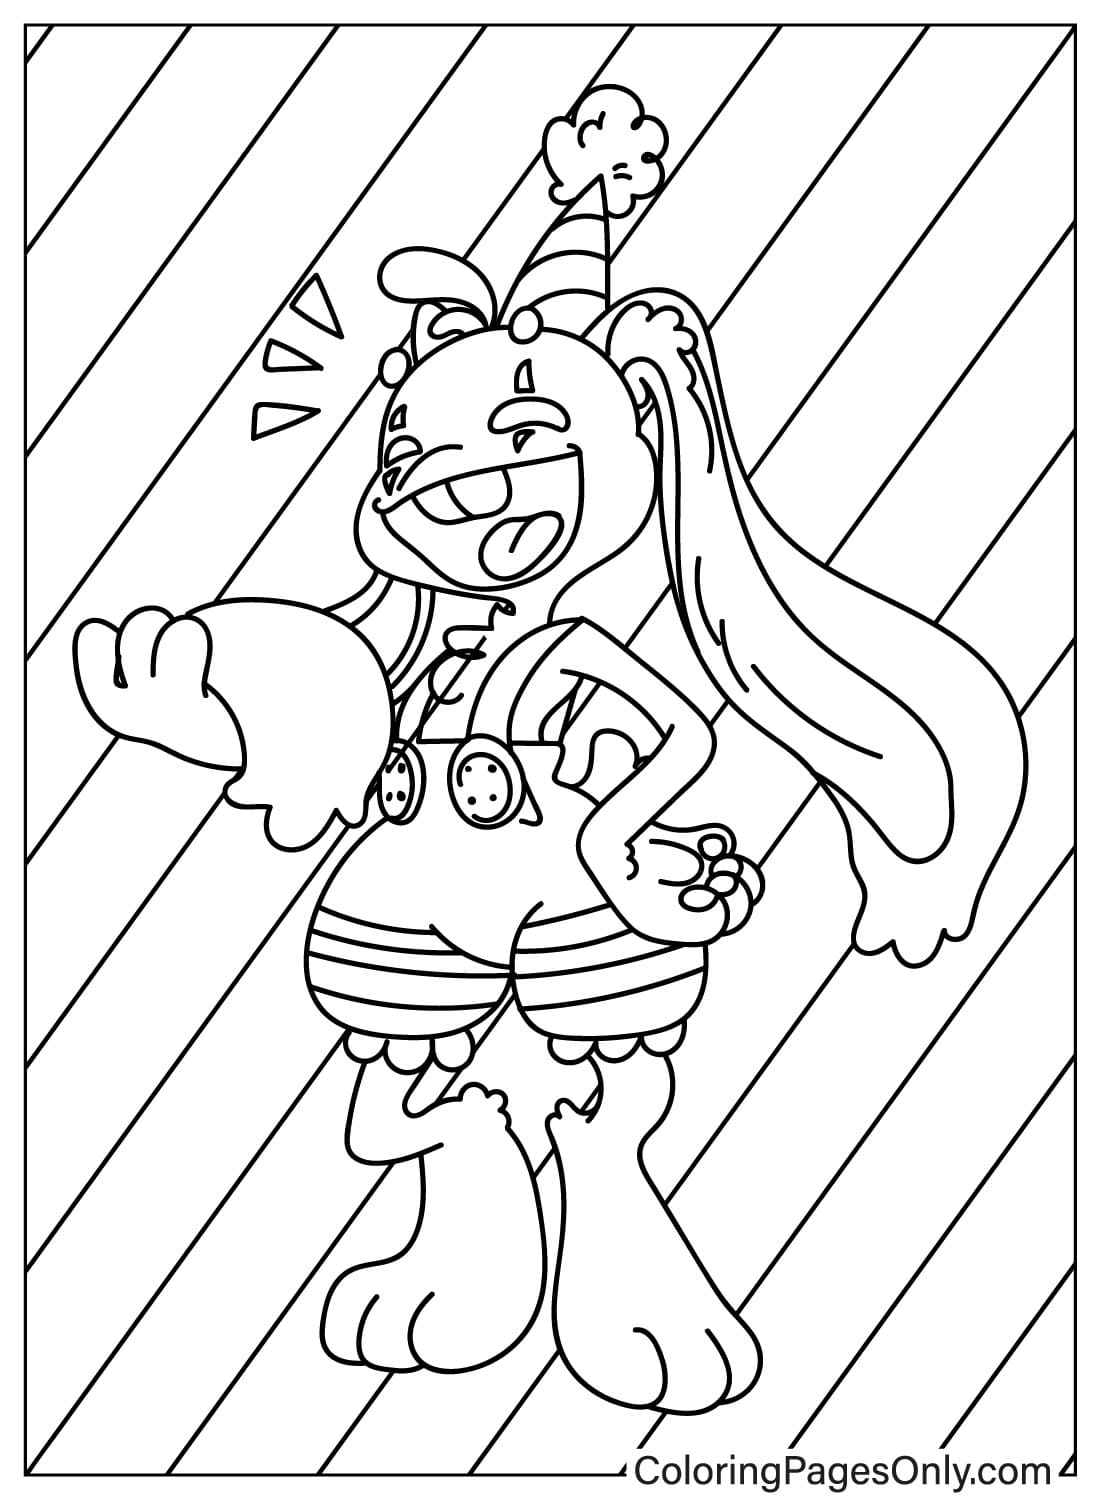 Bunzo Bunny Coloring Page Free from Poppy Playtime